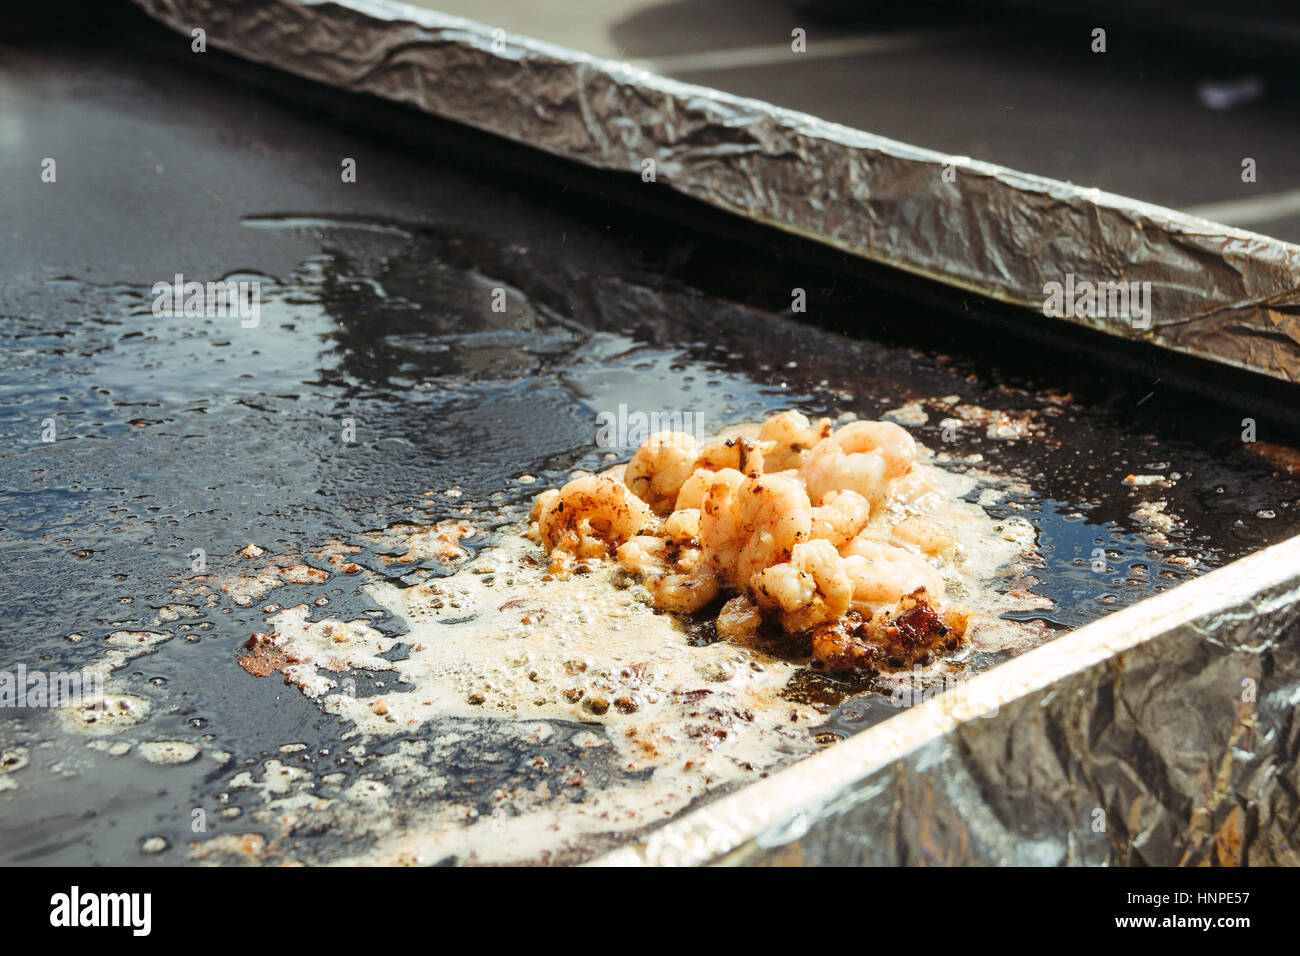 Prawns being cooked in a street food stall Stock Photo